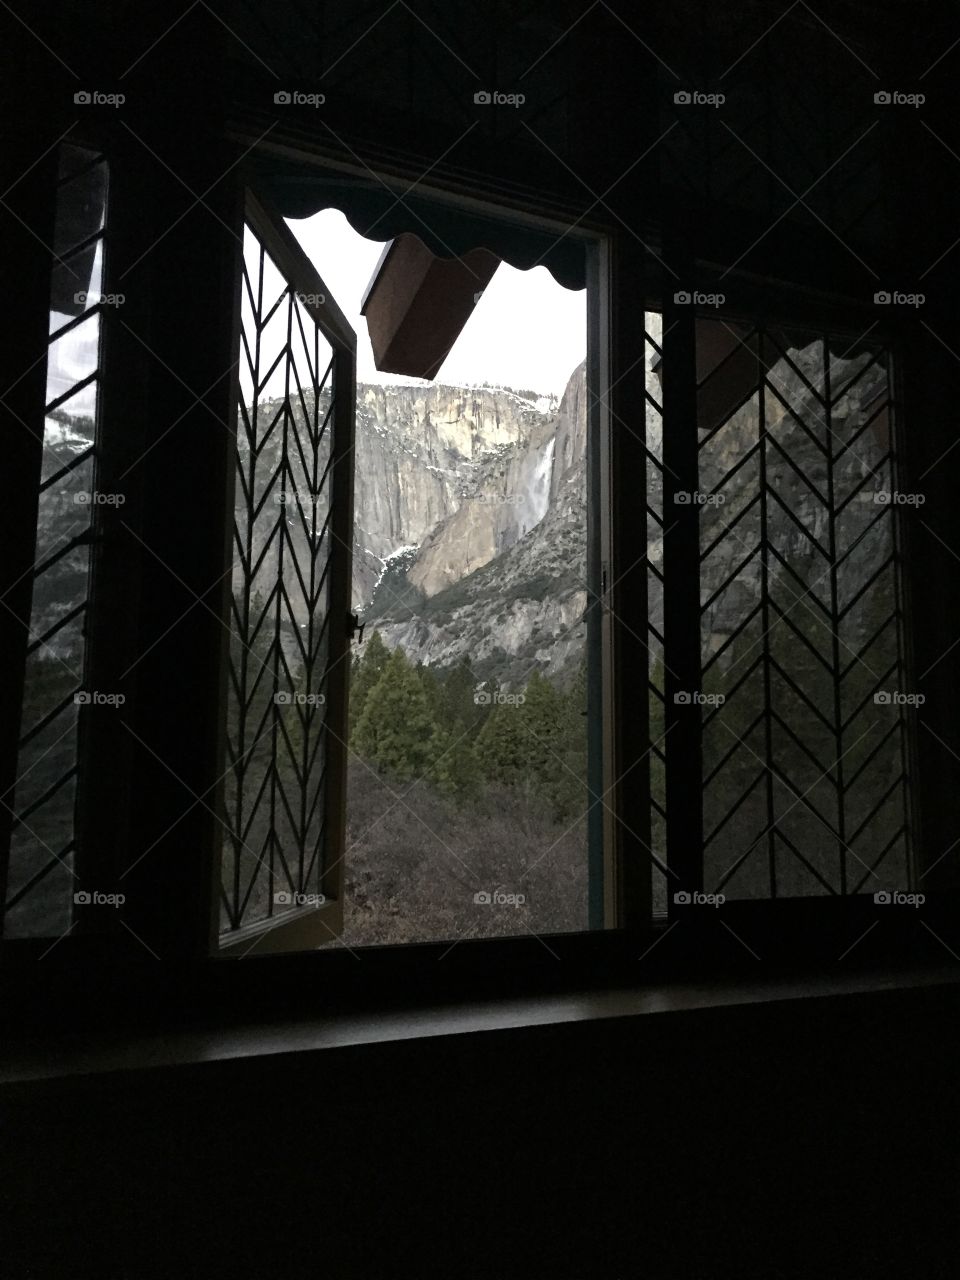 A glimpse of natural beauty through a window in Yosemite in winter.